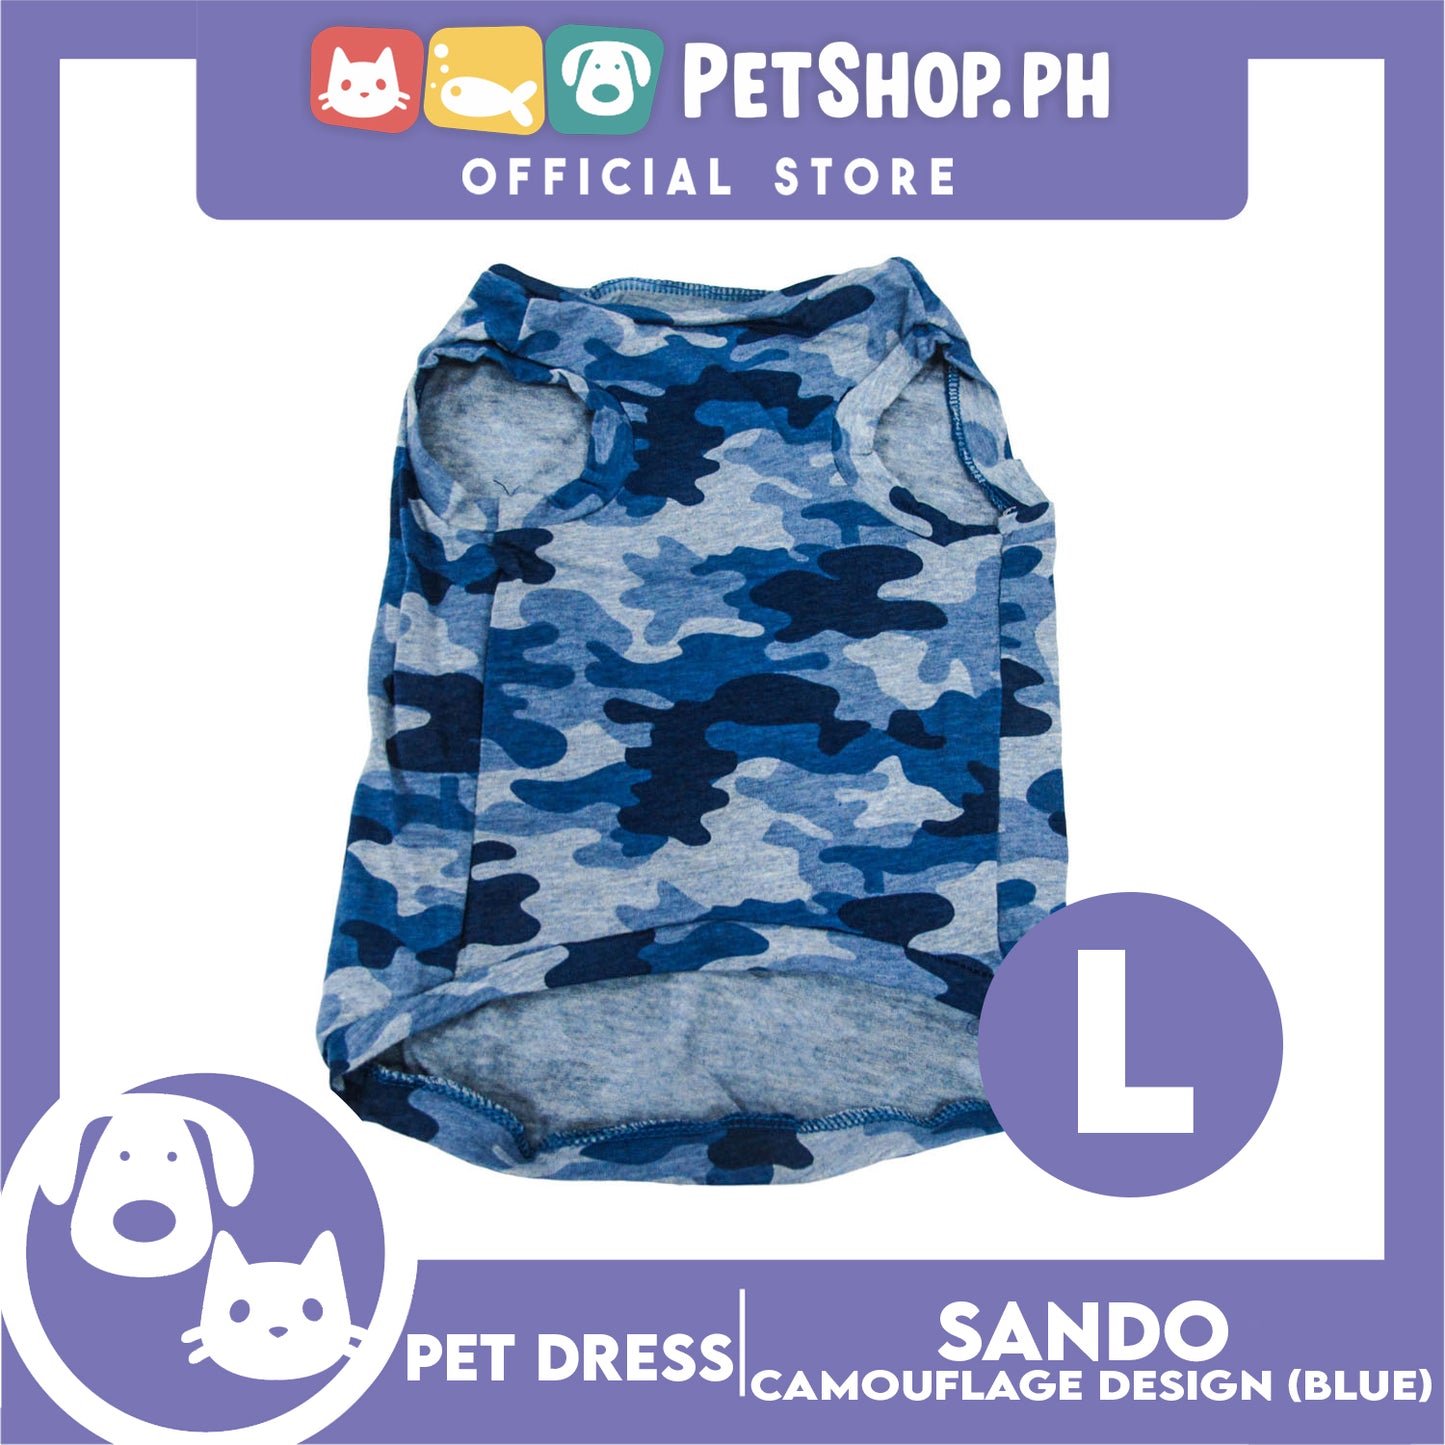 Pet Shirt Camouflage Design Sleeveless Blue (Large) for Puppy, Small Dog and Cat- Sando Breathable Clothes, Pet T-shirt